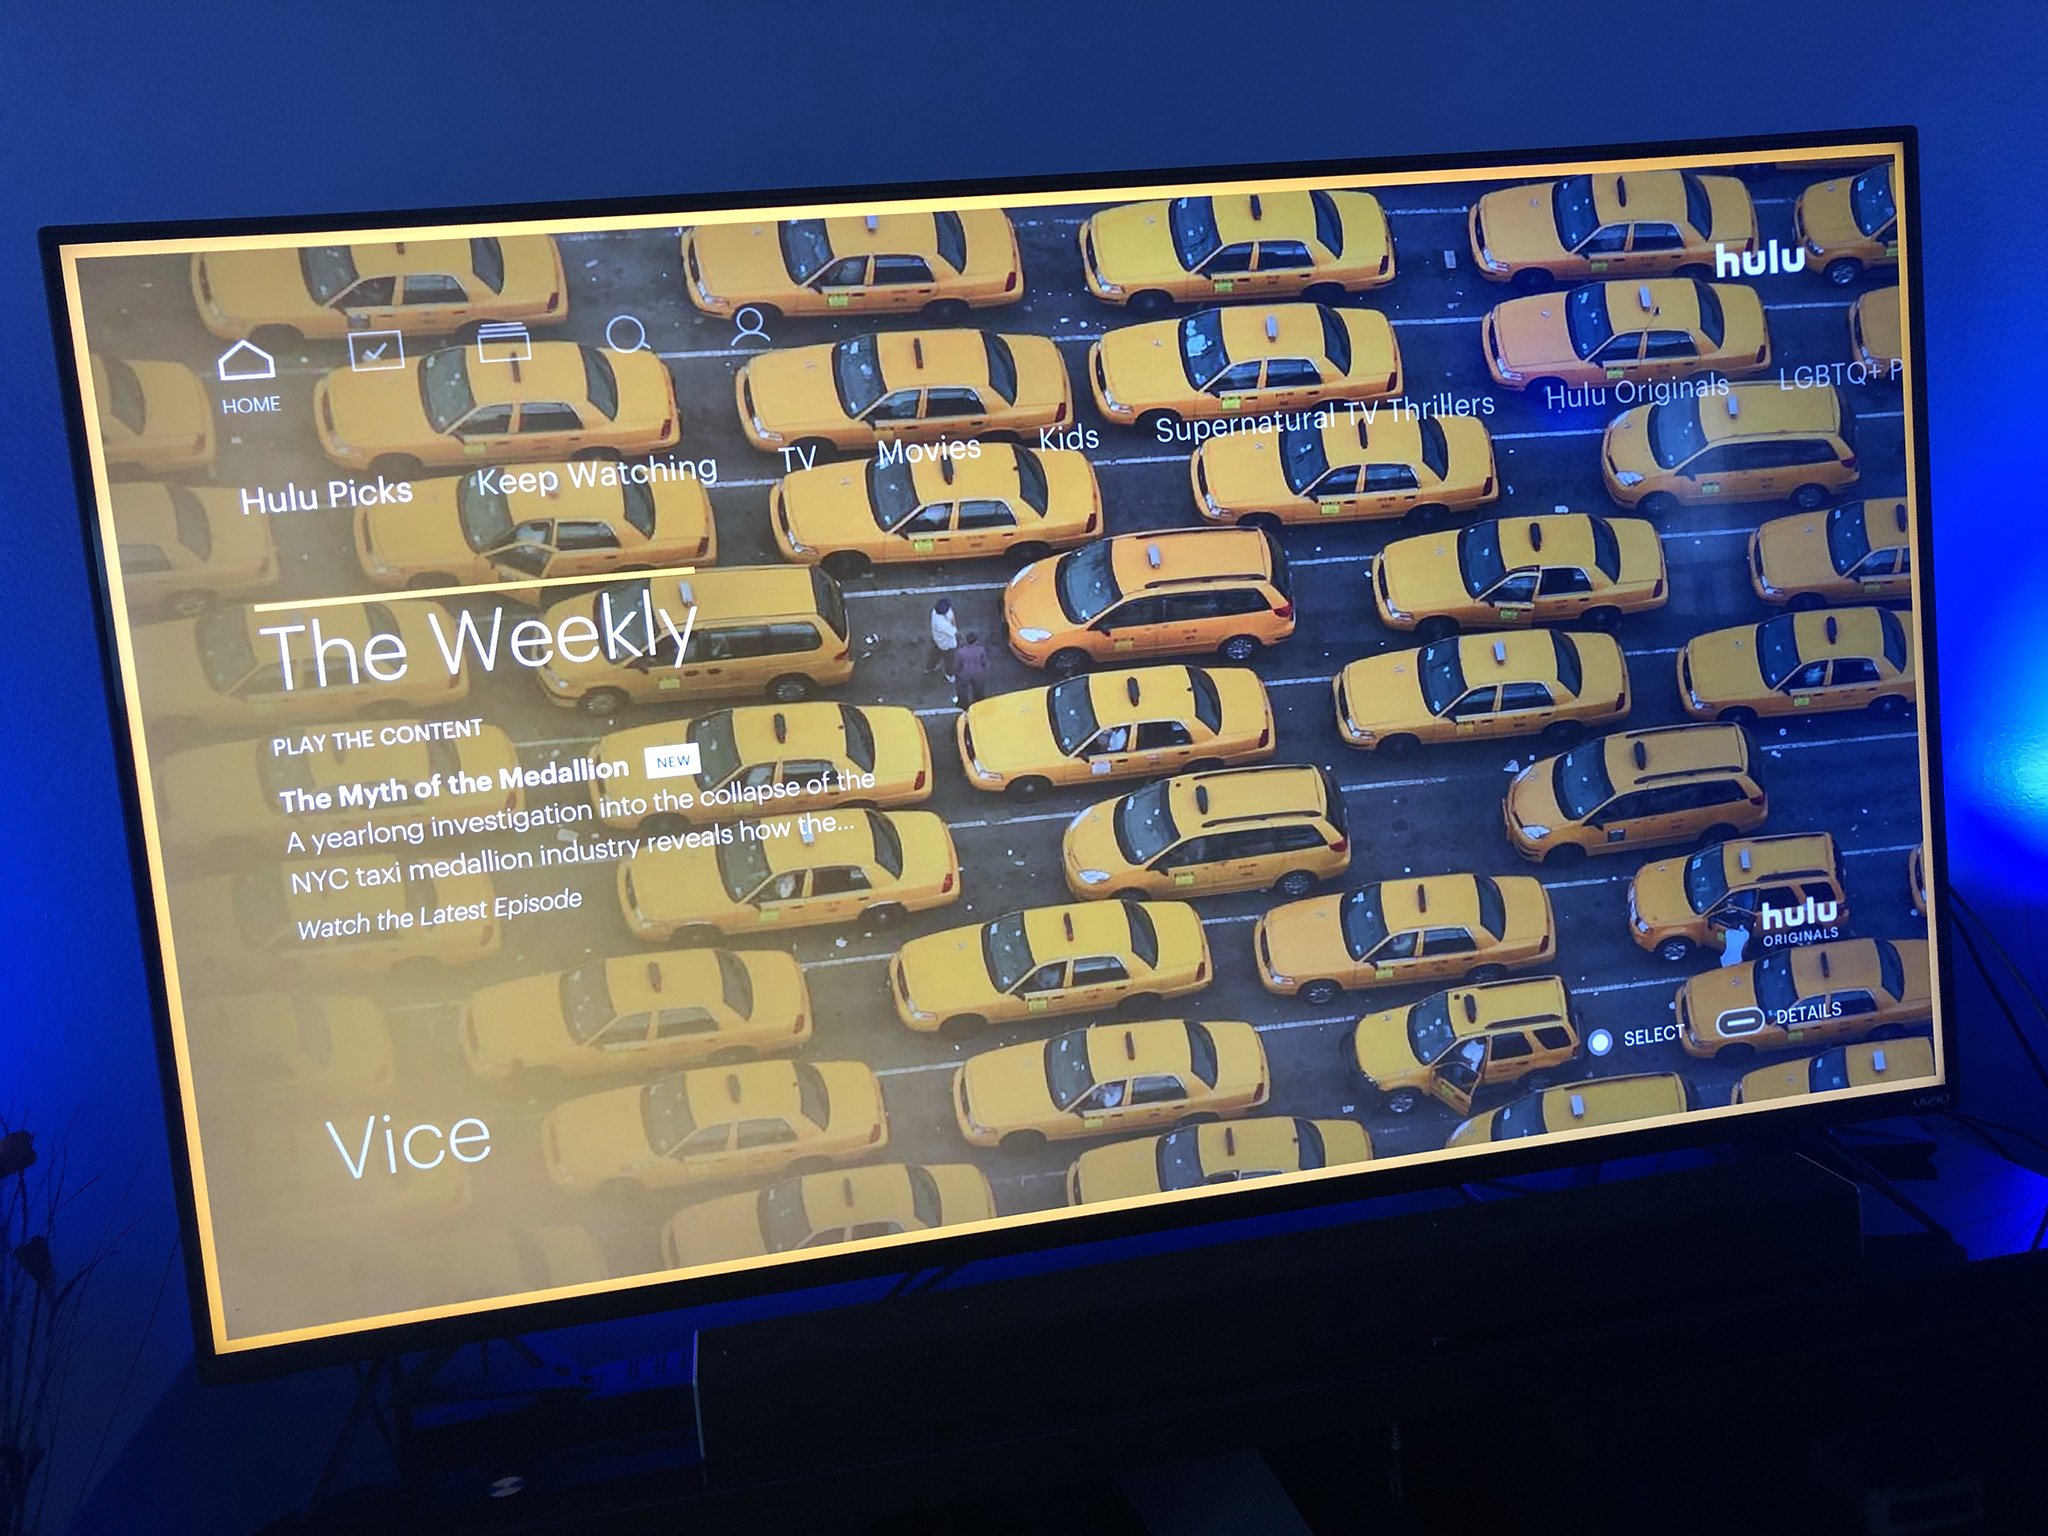 Is Hulu available on Vizio SmartCast? What to Watch